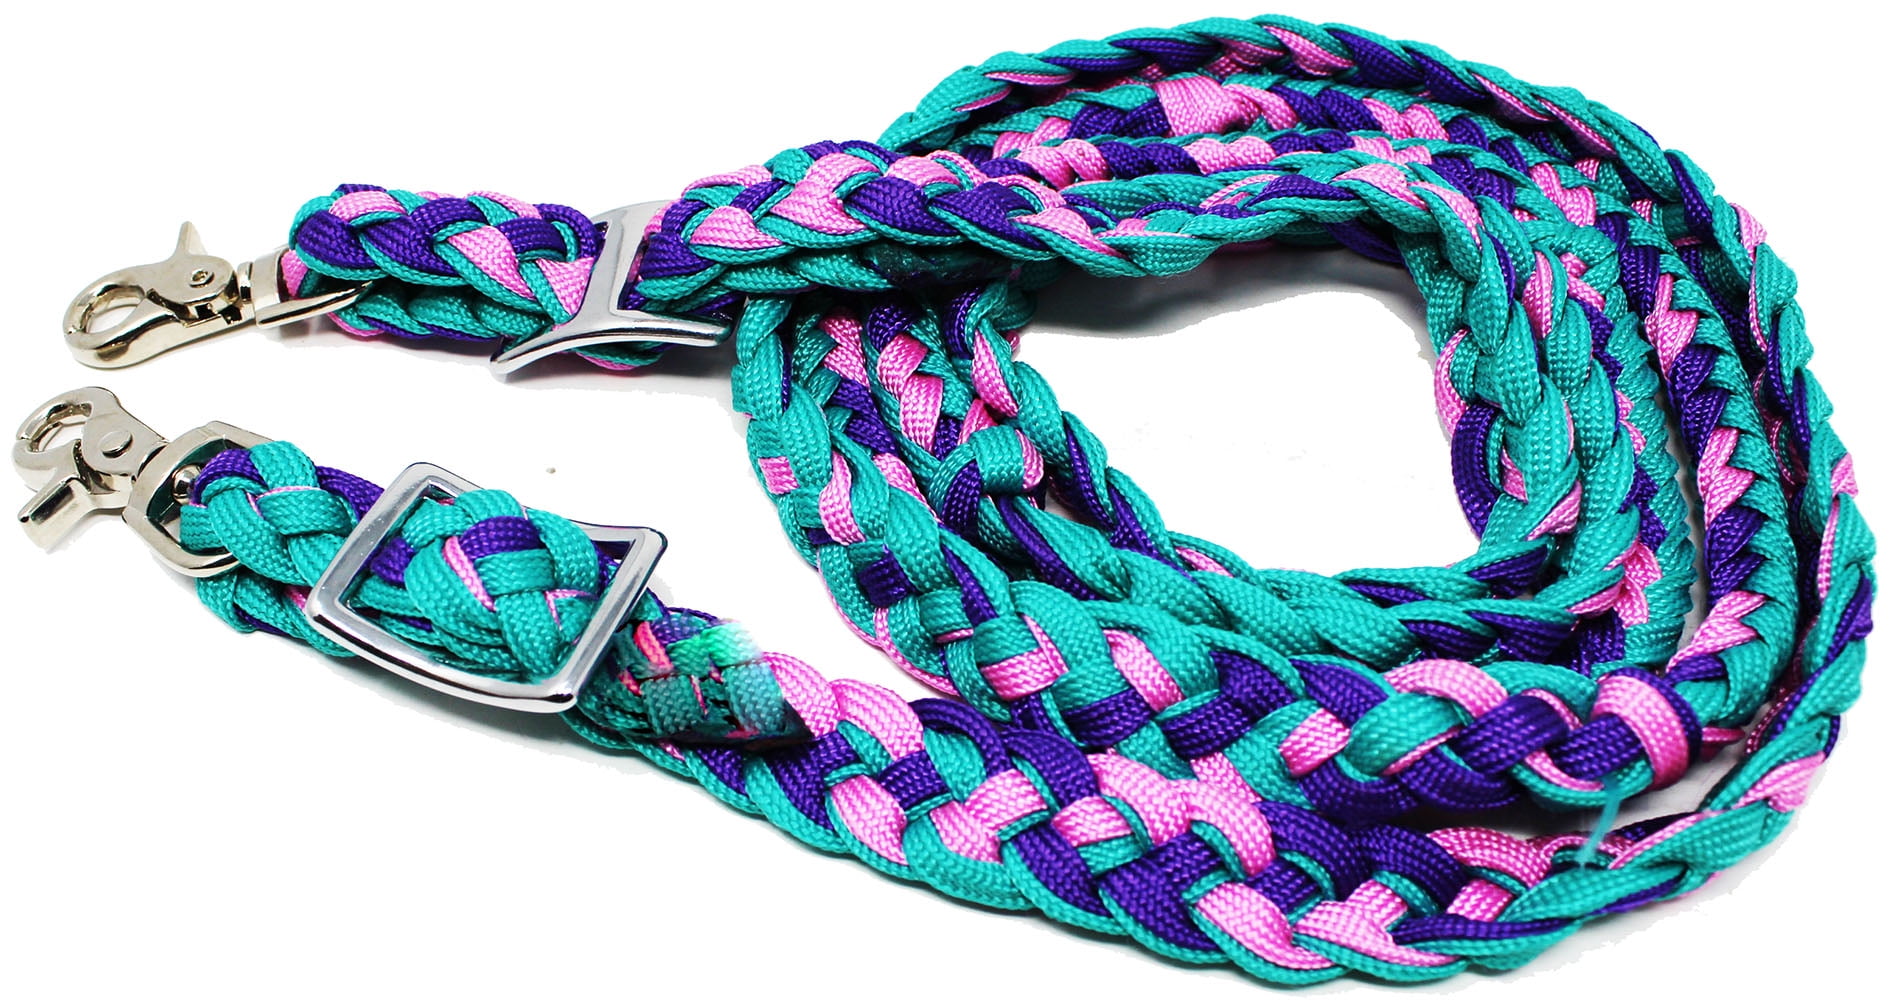 Roping Knotted Horse Tack Western Barrel Reins Nylon Braided Turquoise 607476 